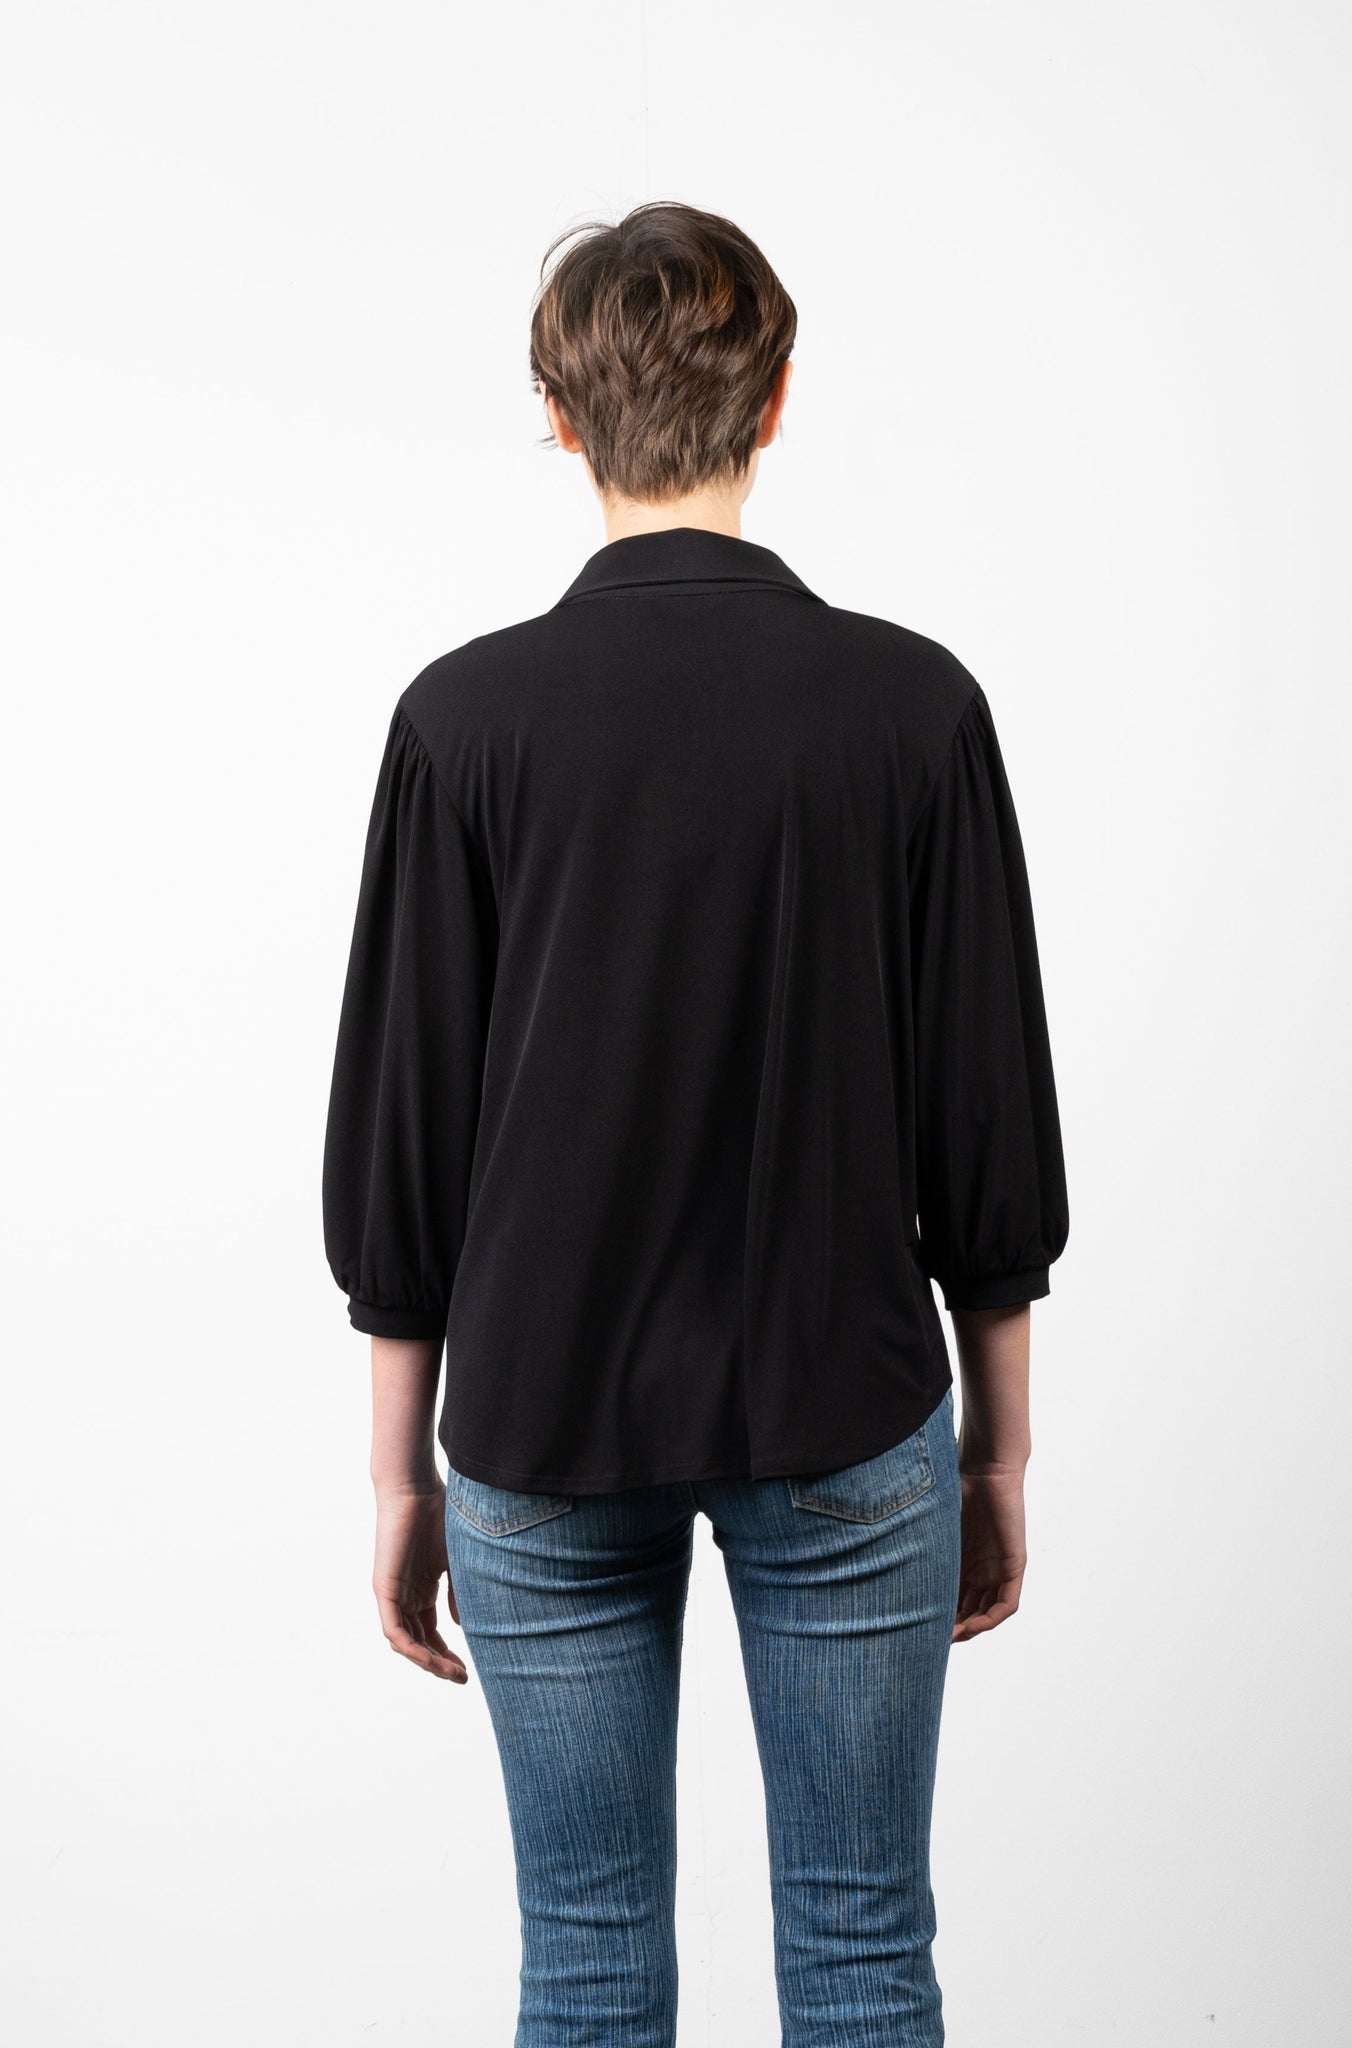 3/4 SLEEVE BUTTON UP SHIRT WITH COLLAR - T11185-ITY BLACK